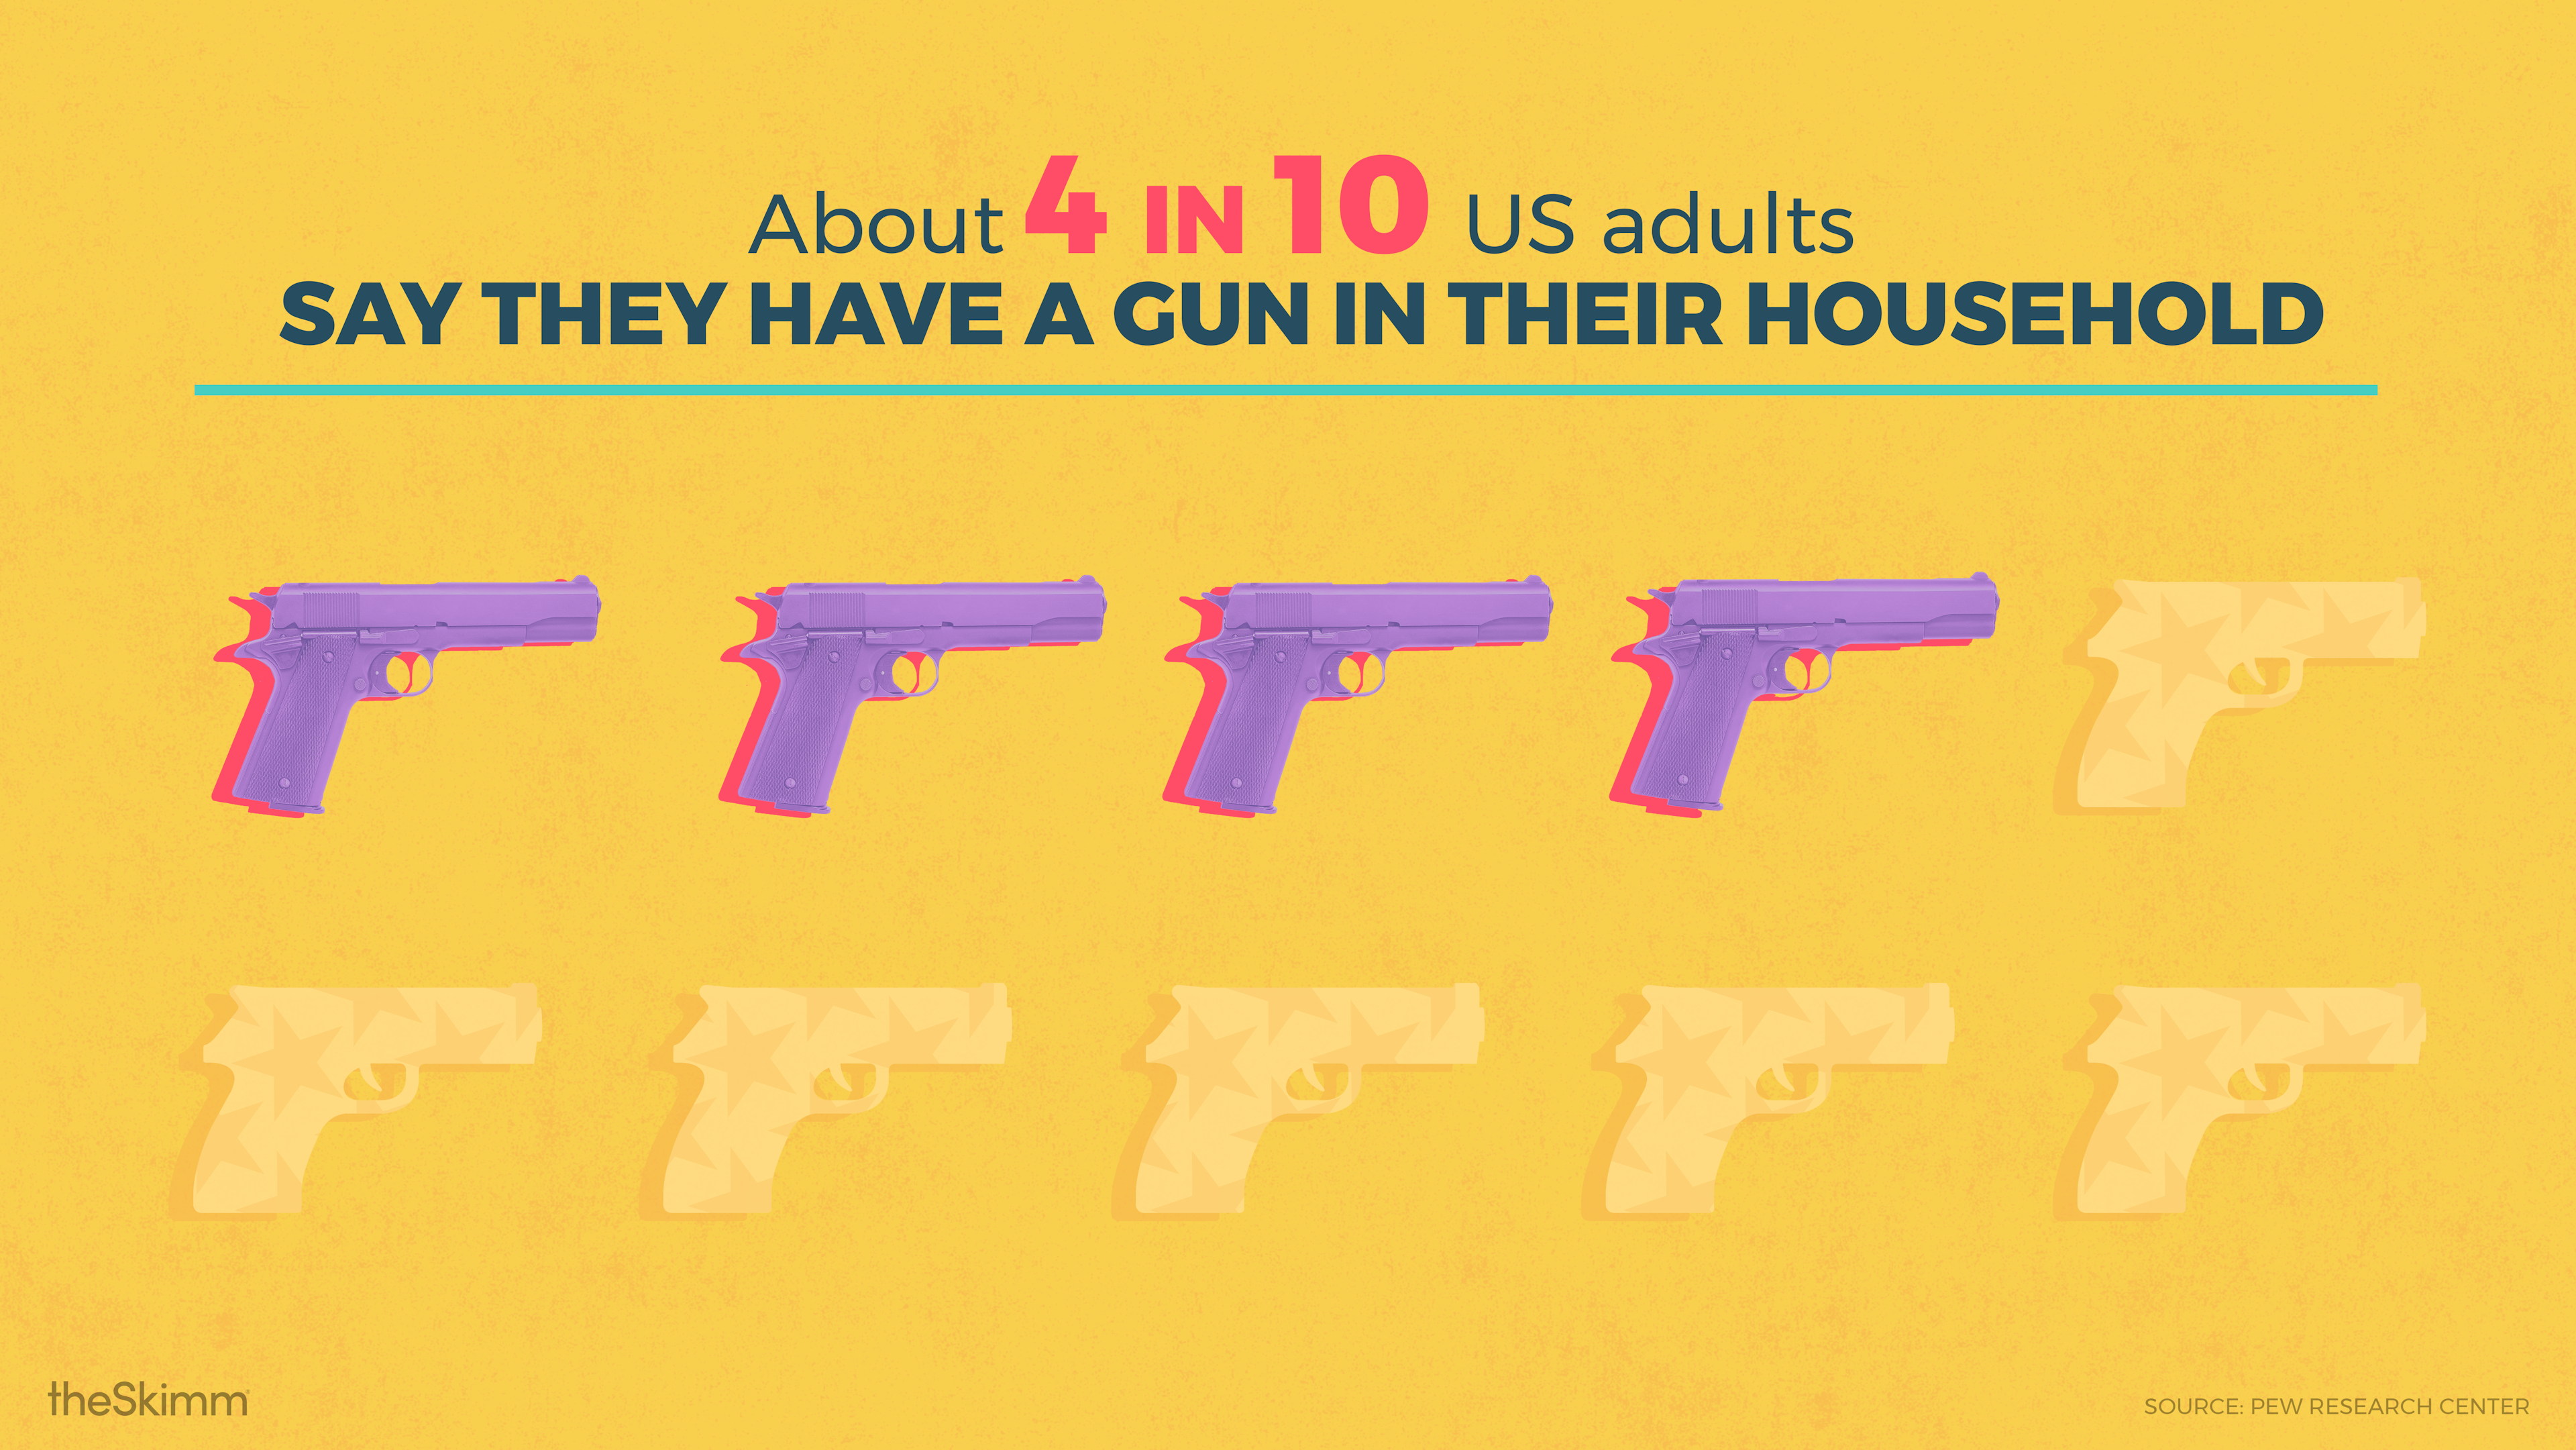 About 4 in 10 US adults say they have a gun in their household